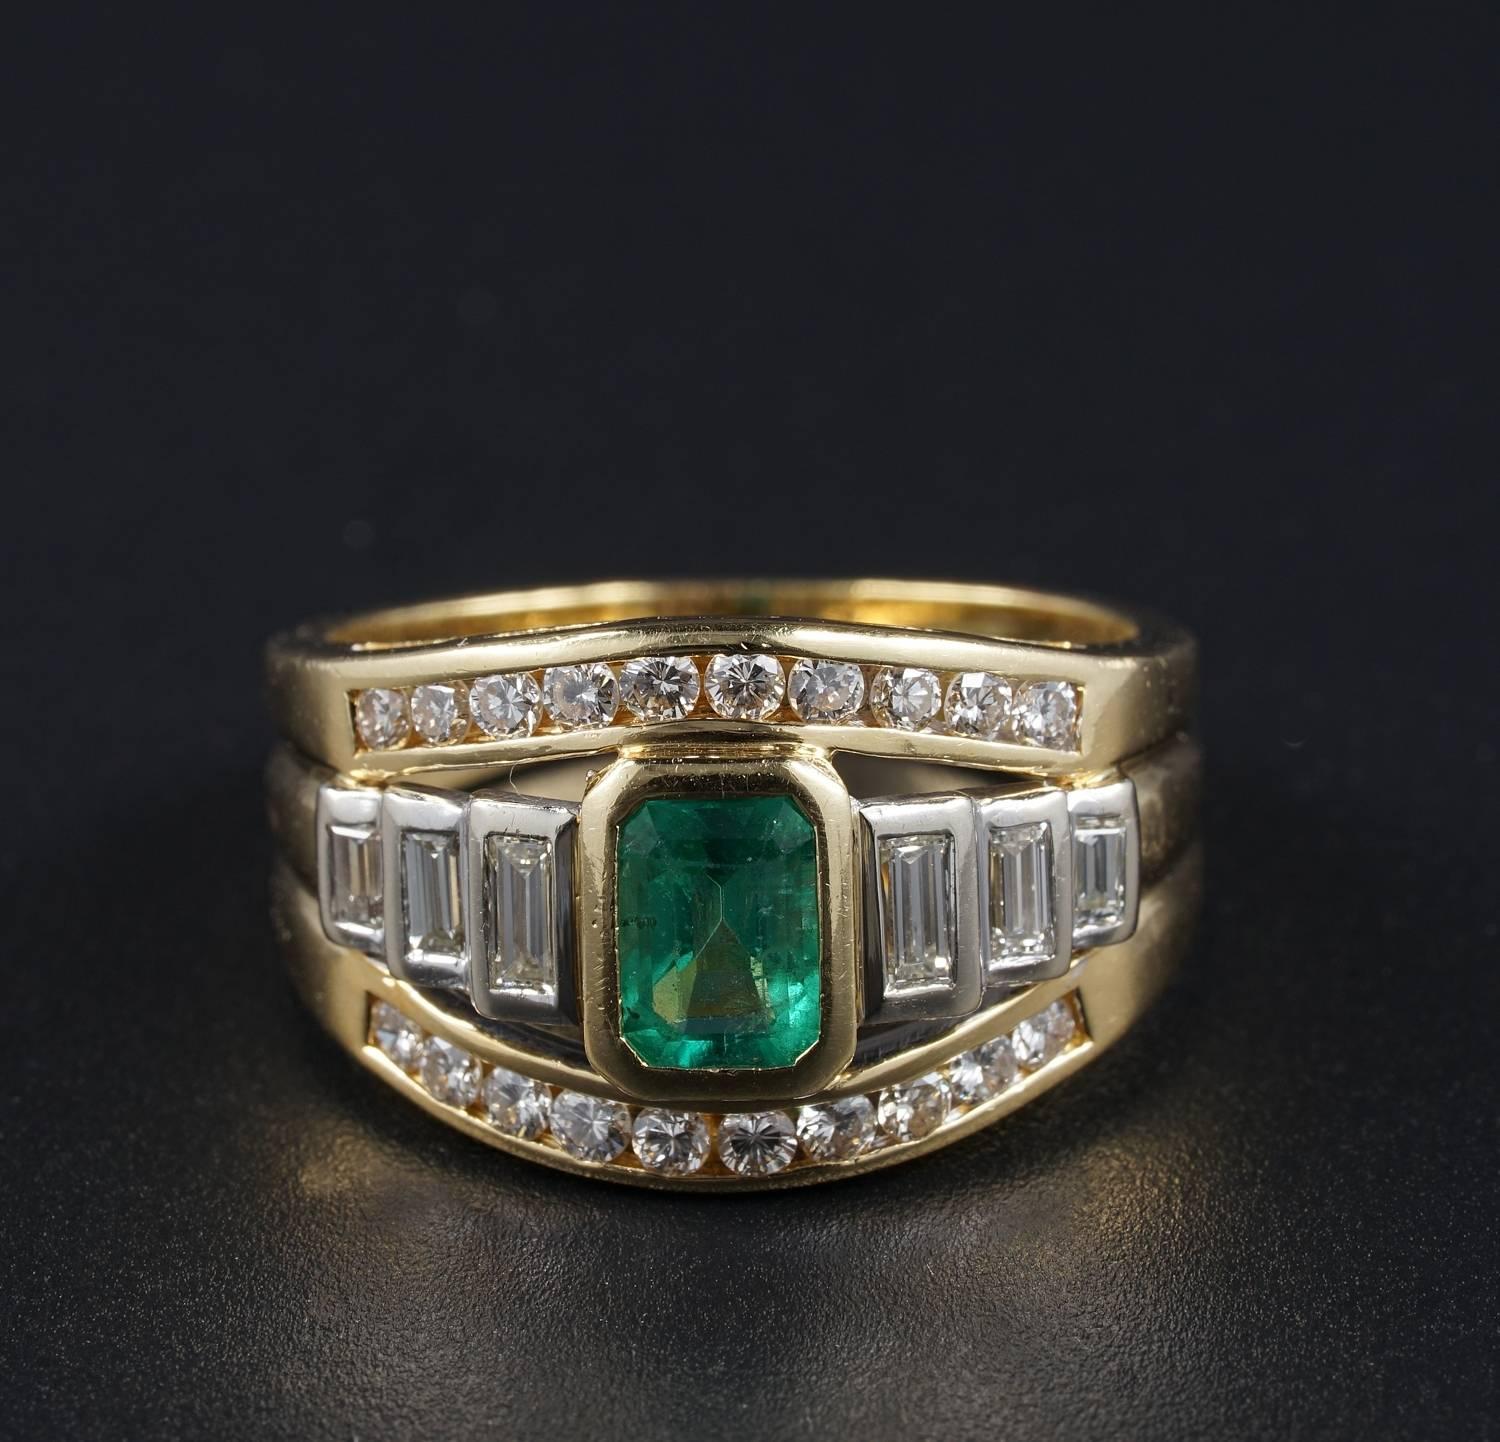 Greatly designed as wide band in a classy style very wearable and elegant ring
Totally hand made mounting of heavy 18 KT solid gold - marked
Centrally set with 1.0 CT Natural Colombian Emerald of fine quality being excellent in colour grade and also